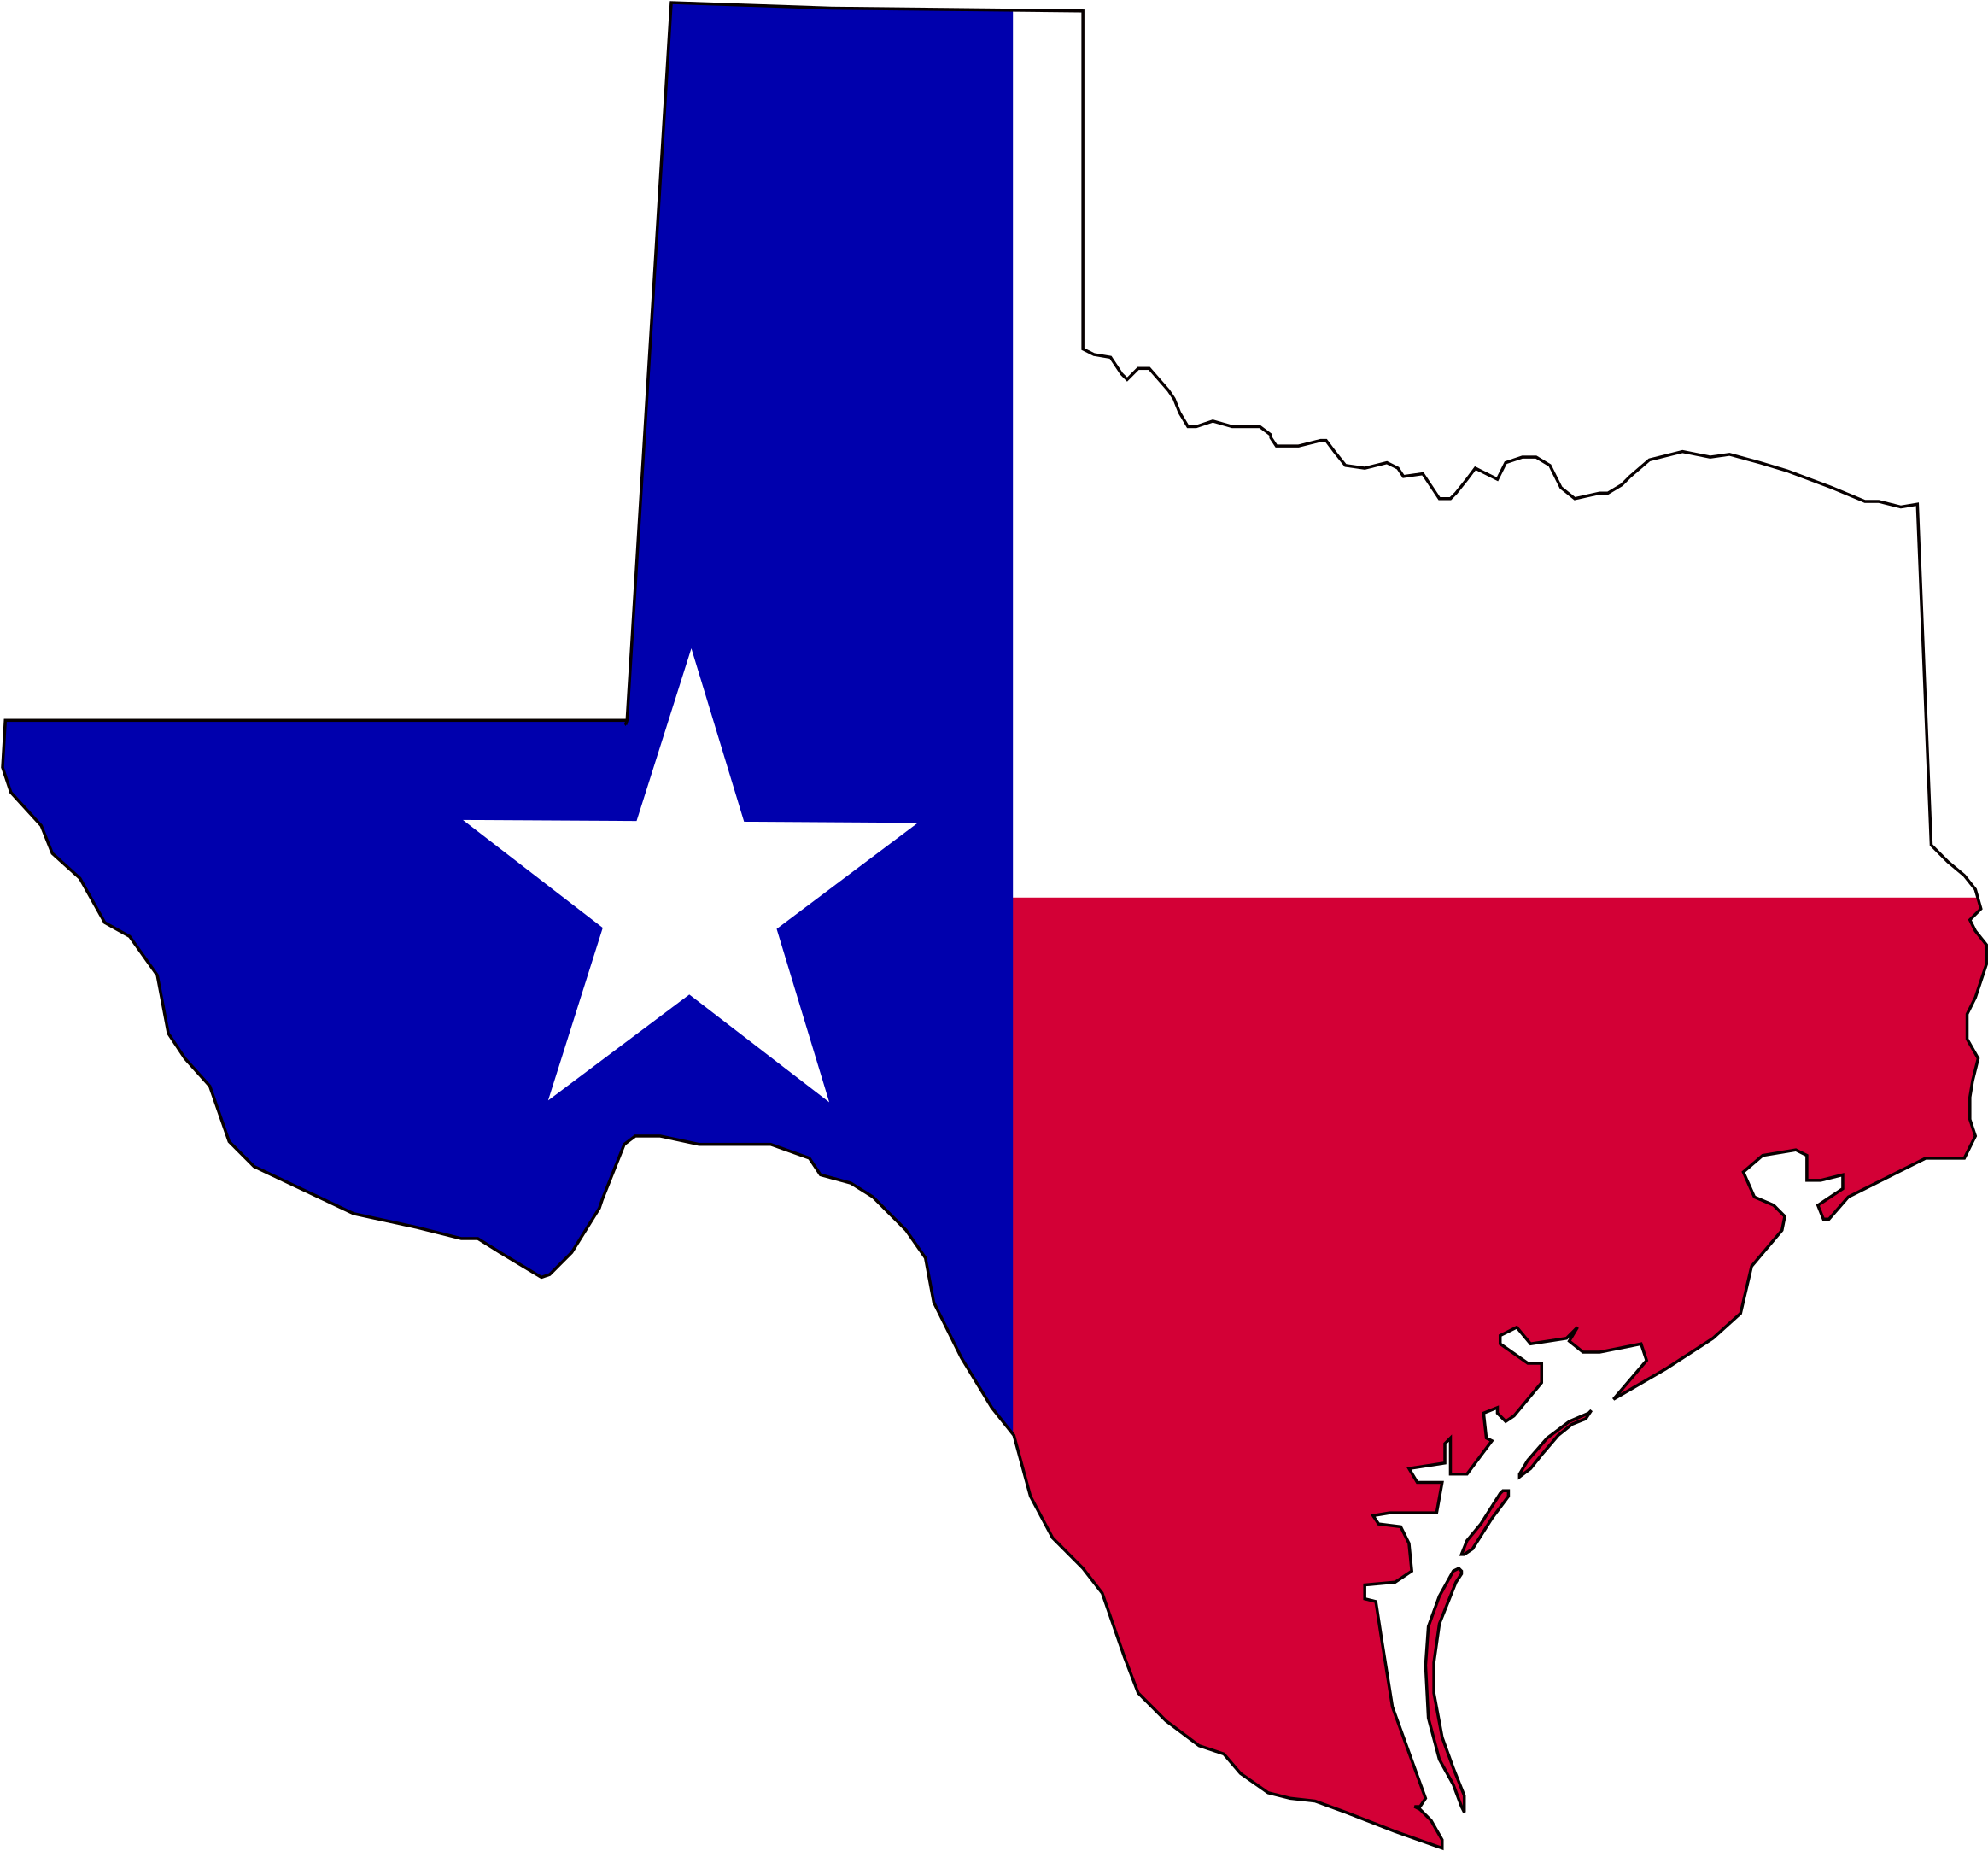 Flag Of Texas In Texas - Texas Won Independence From Mexico (2400x2235)